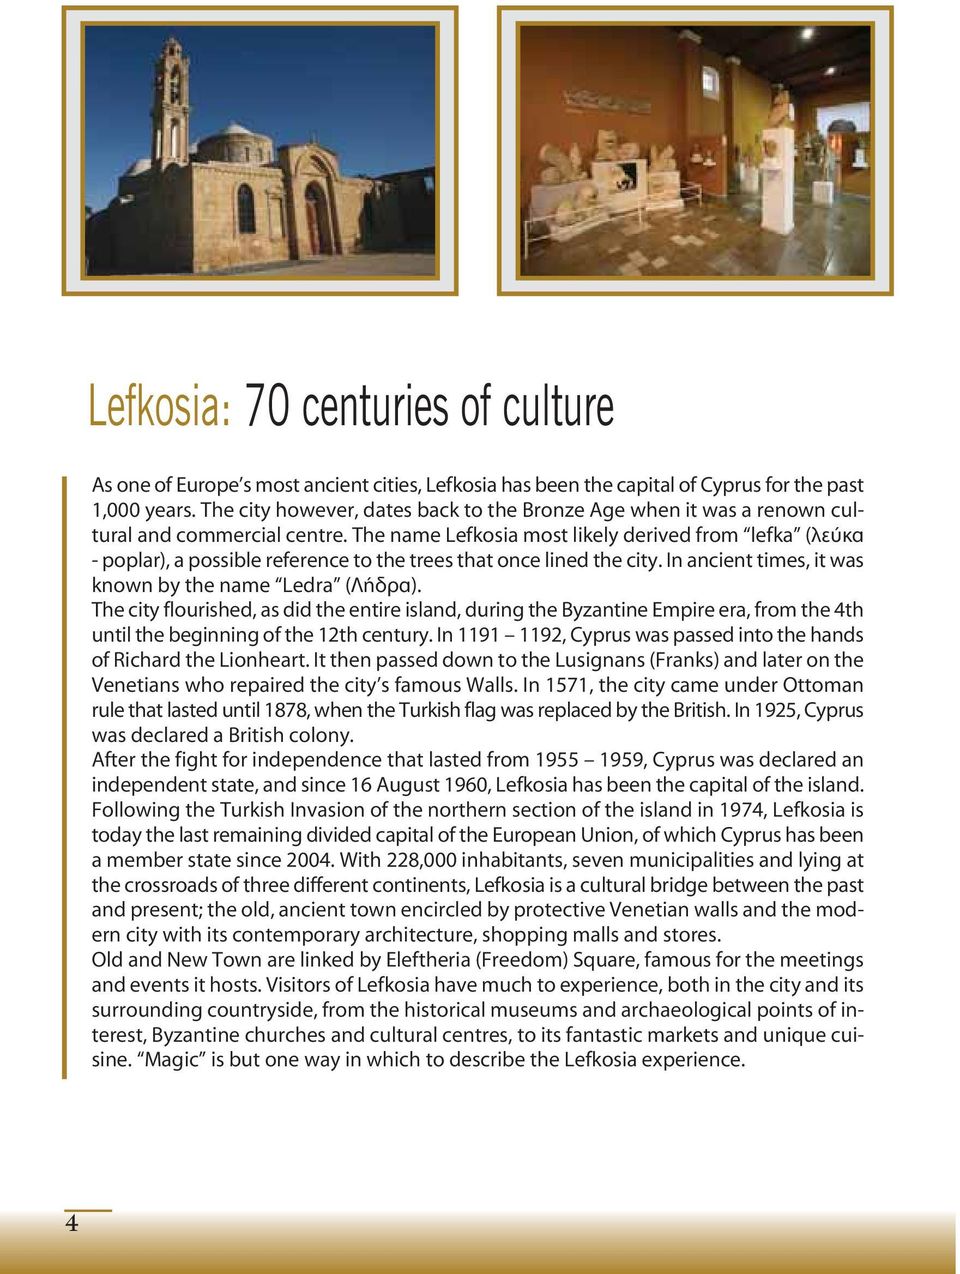 The name Lefkosia most likely derived from lefka (λεύκα - poplar), a possible reference to the trees that once lined the city. In ancient times, it was known by the name Ledra (Λήδρα).